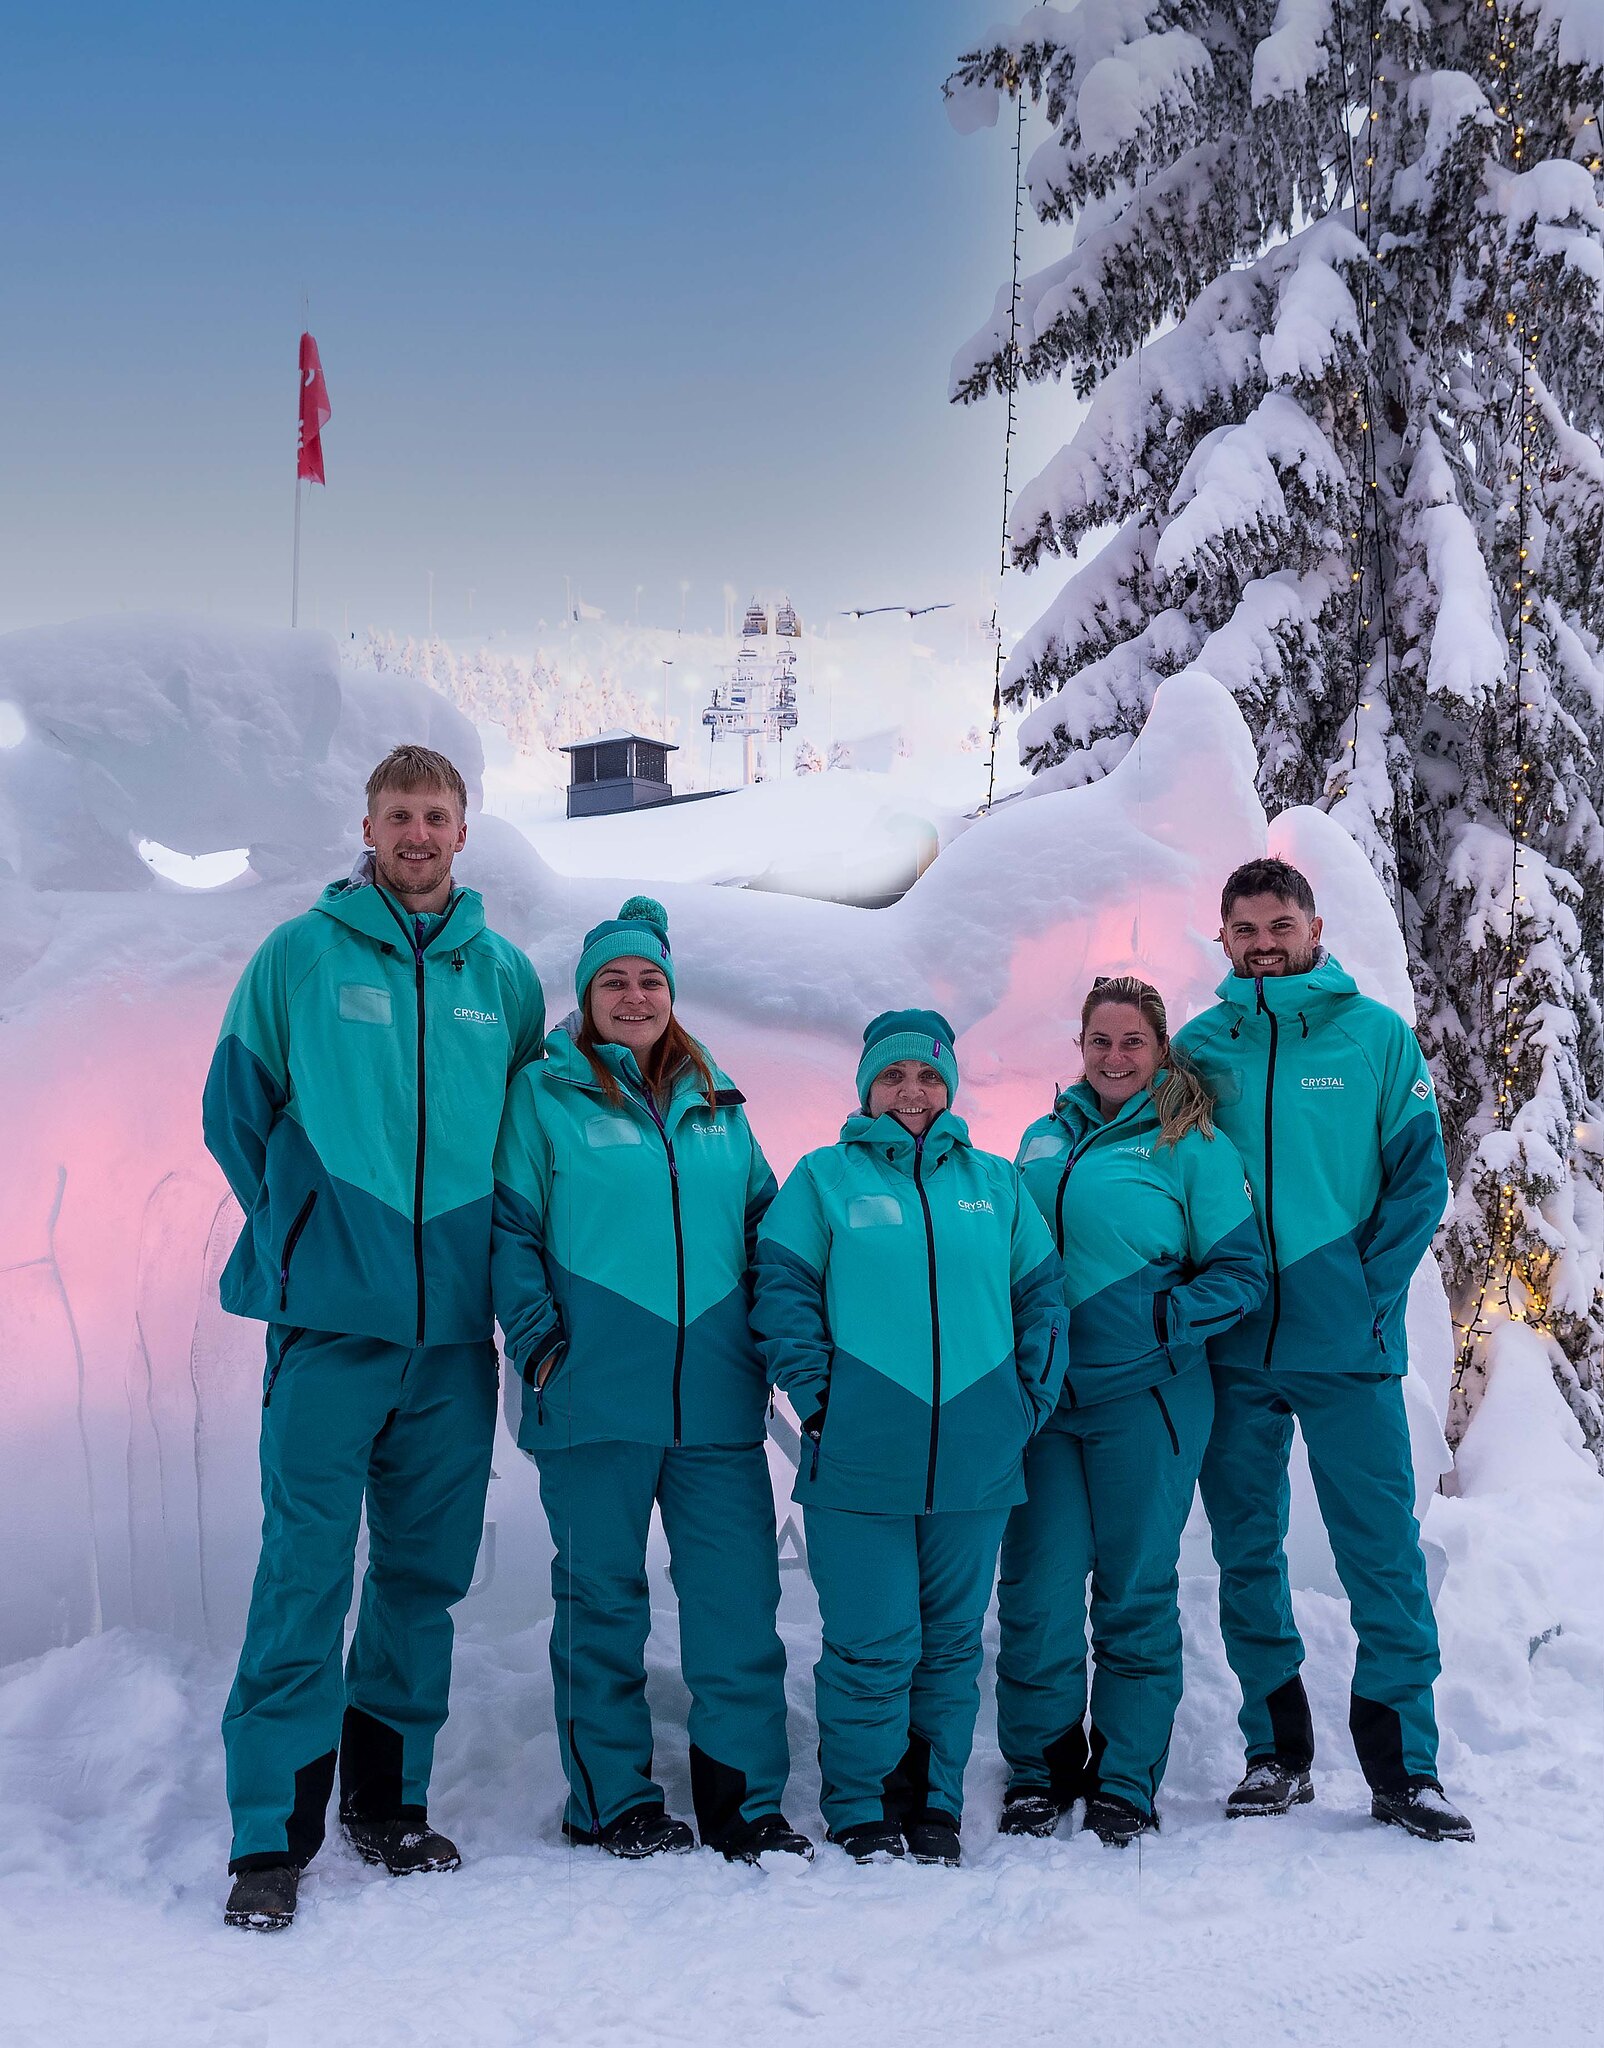 An image of ski reps on a mountain in a snowy landscape.